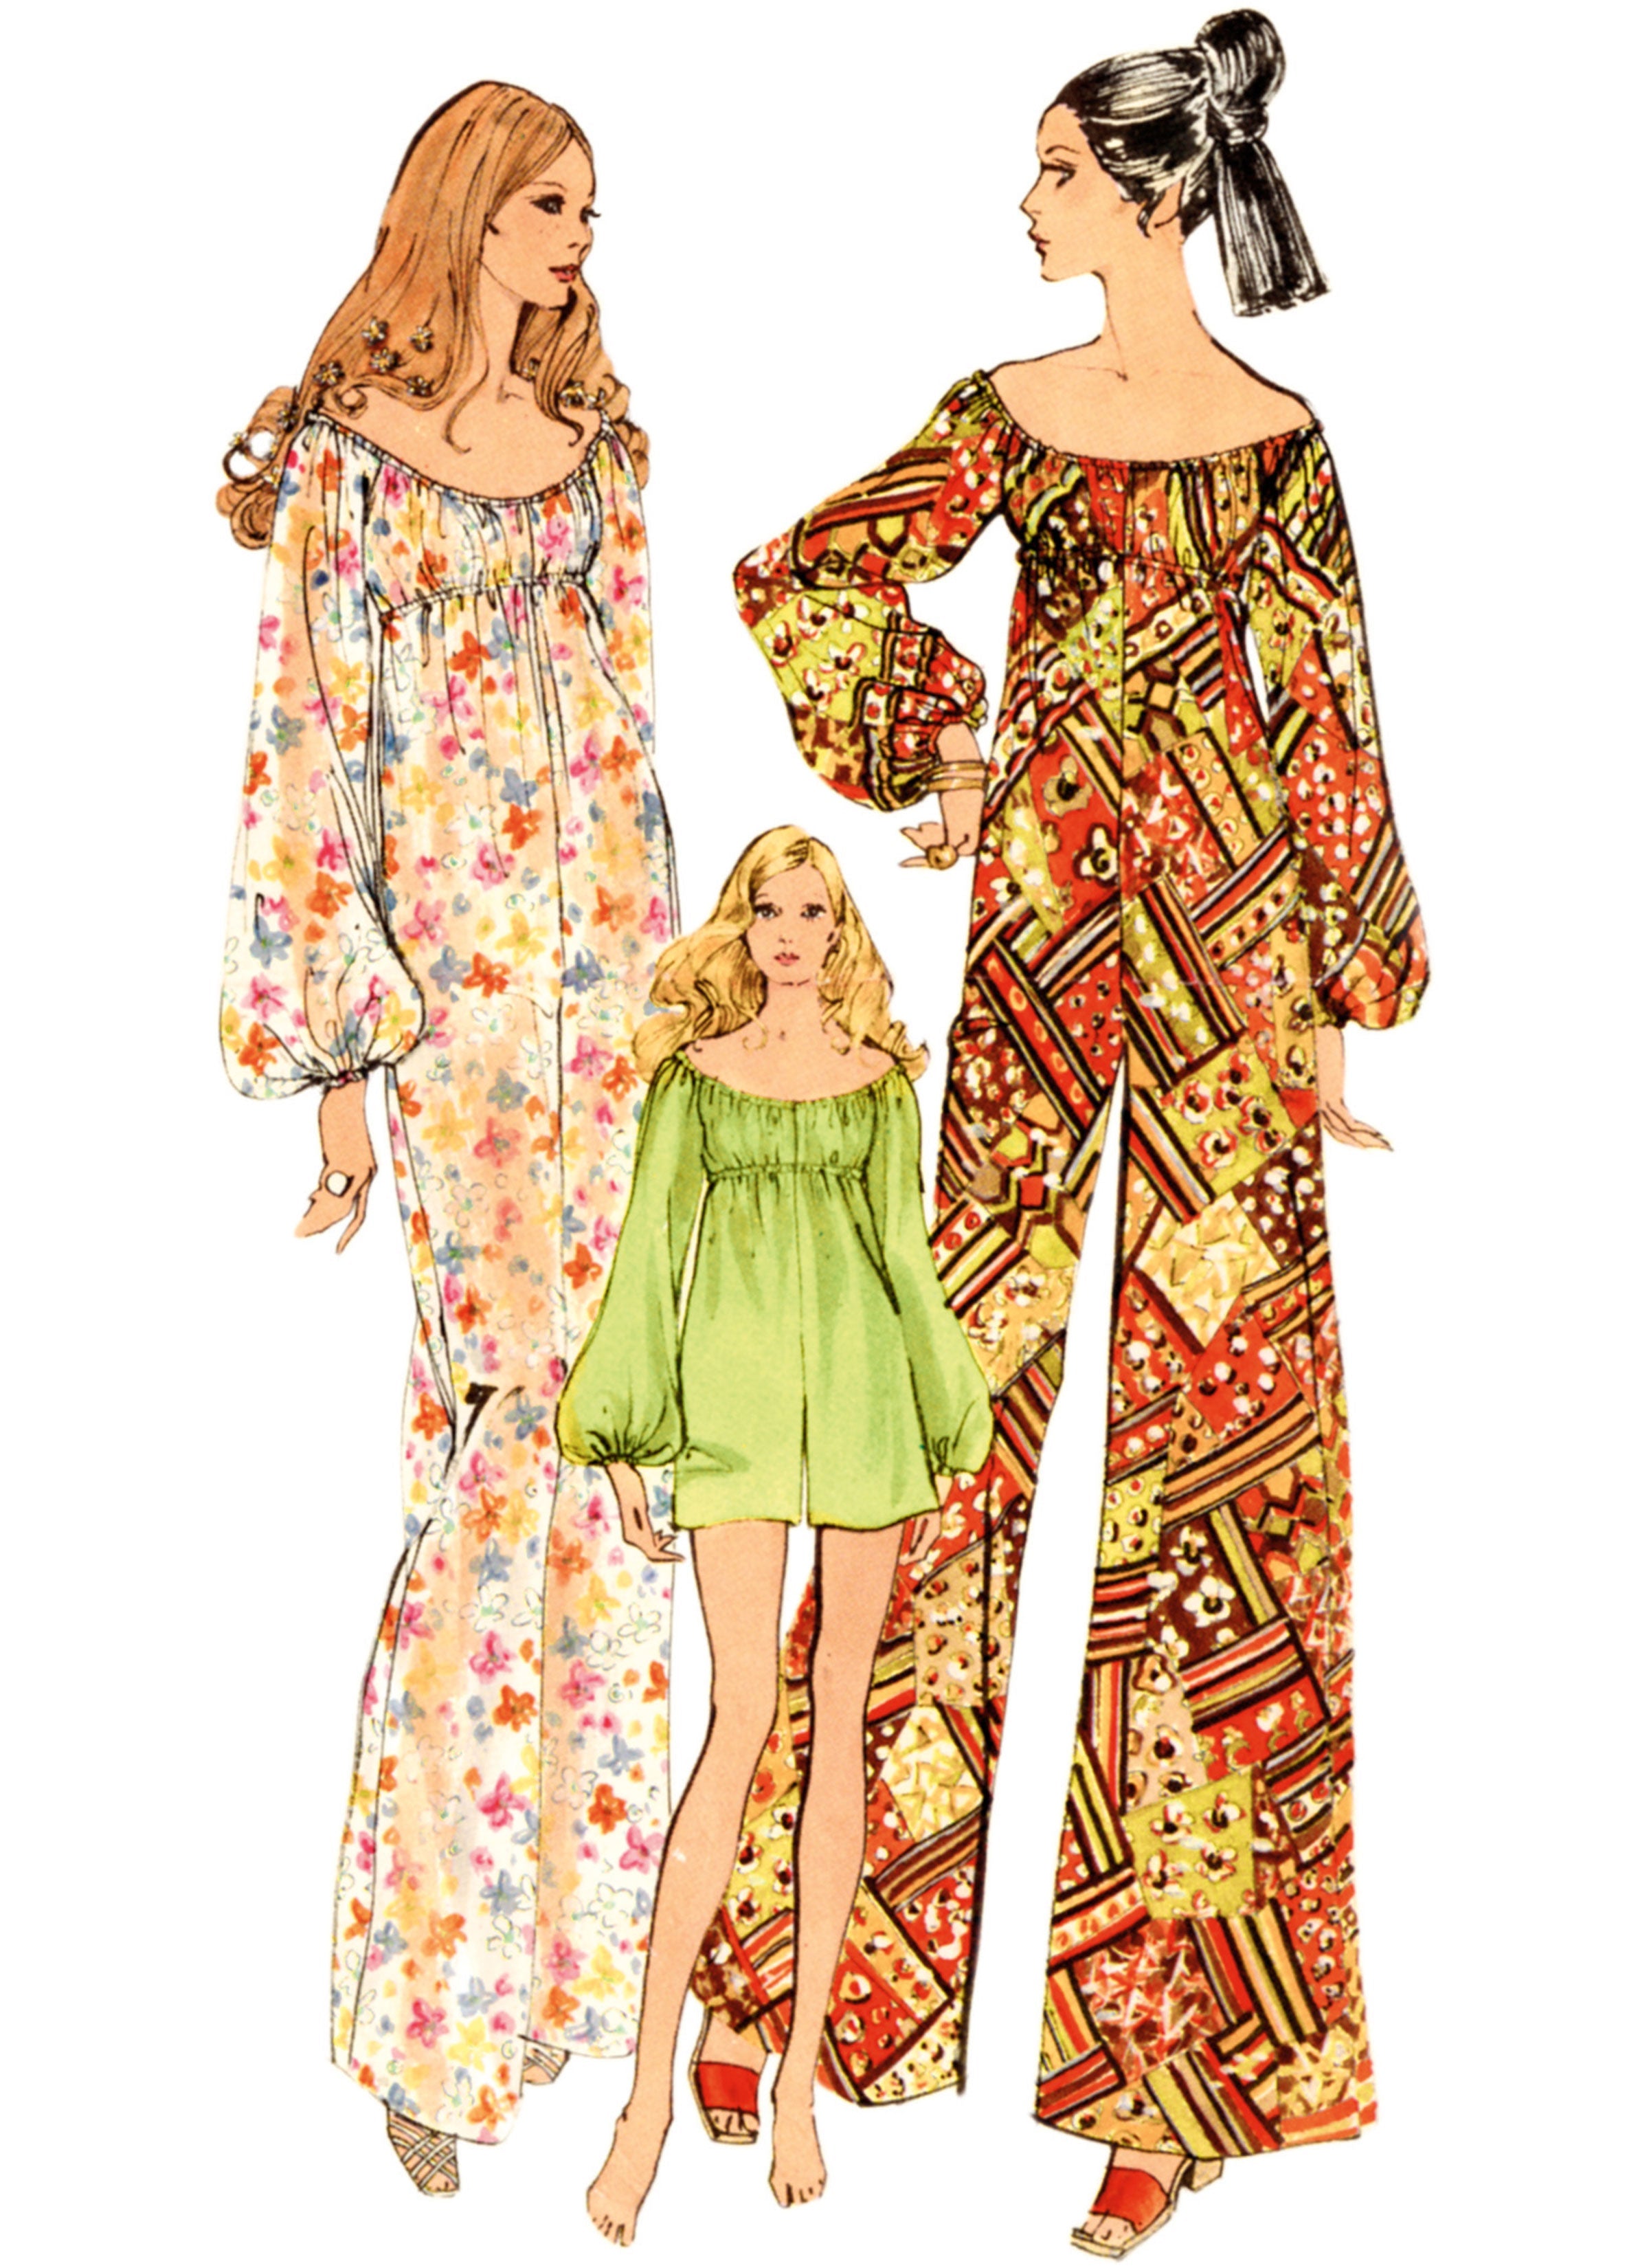 Vogue sewing pattern 2041 Jumpsuit in Two Lengths from Jaycotts Sewing Supplies